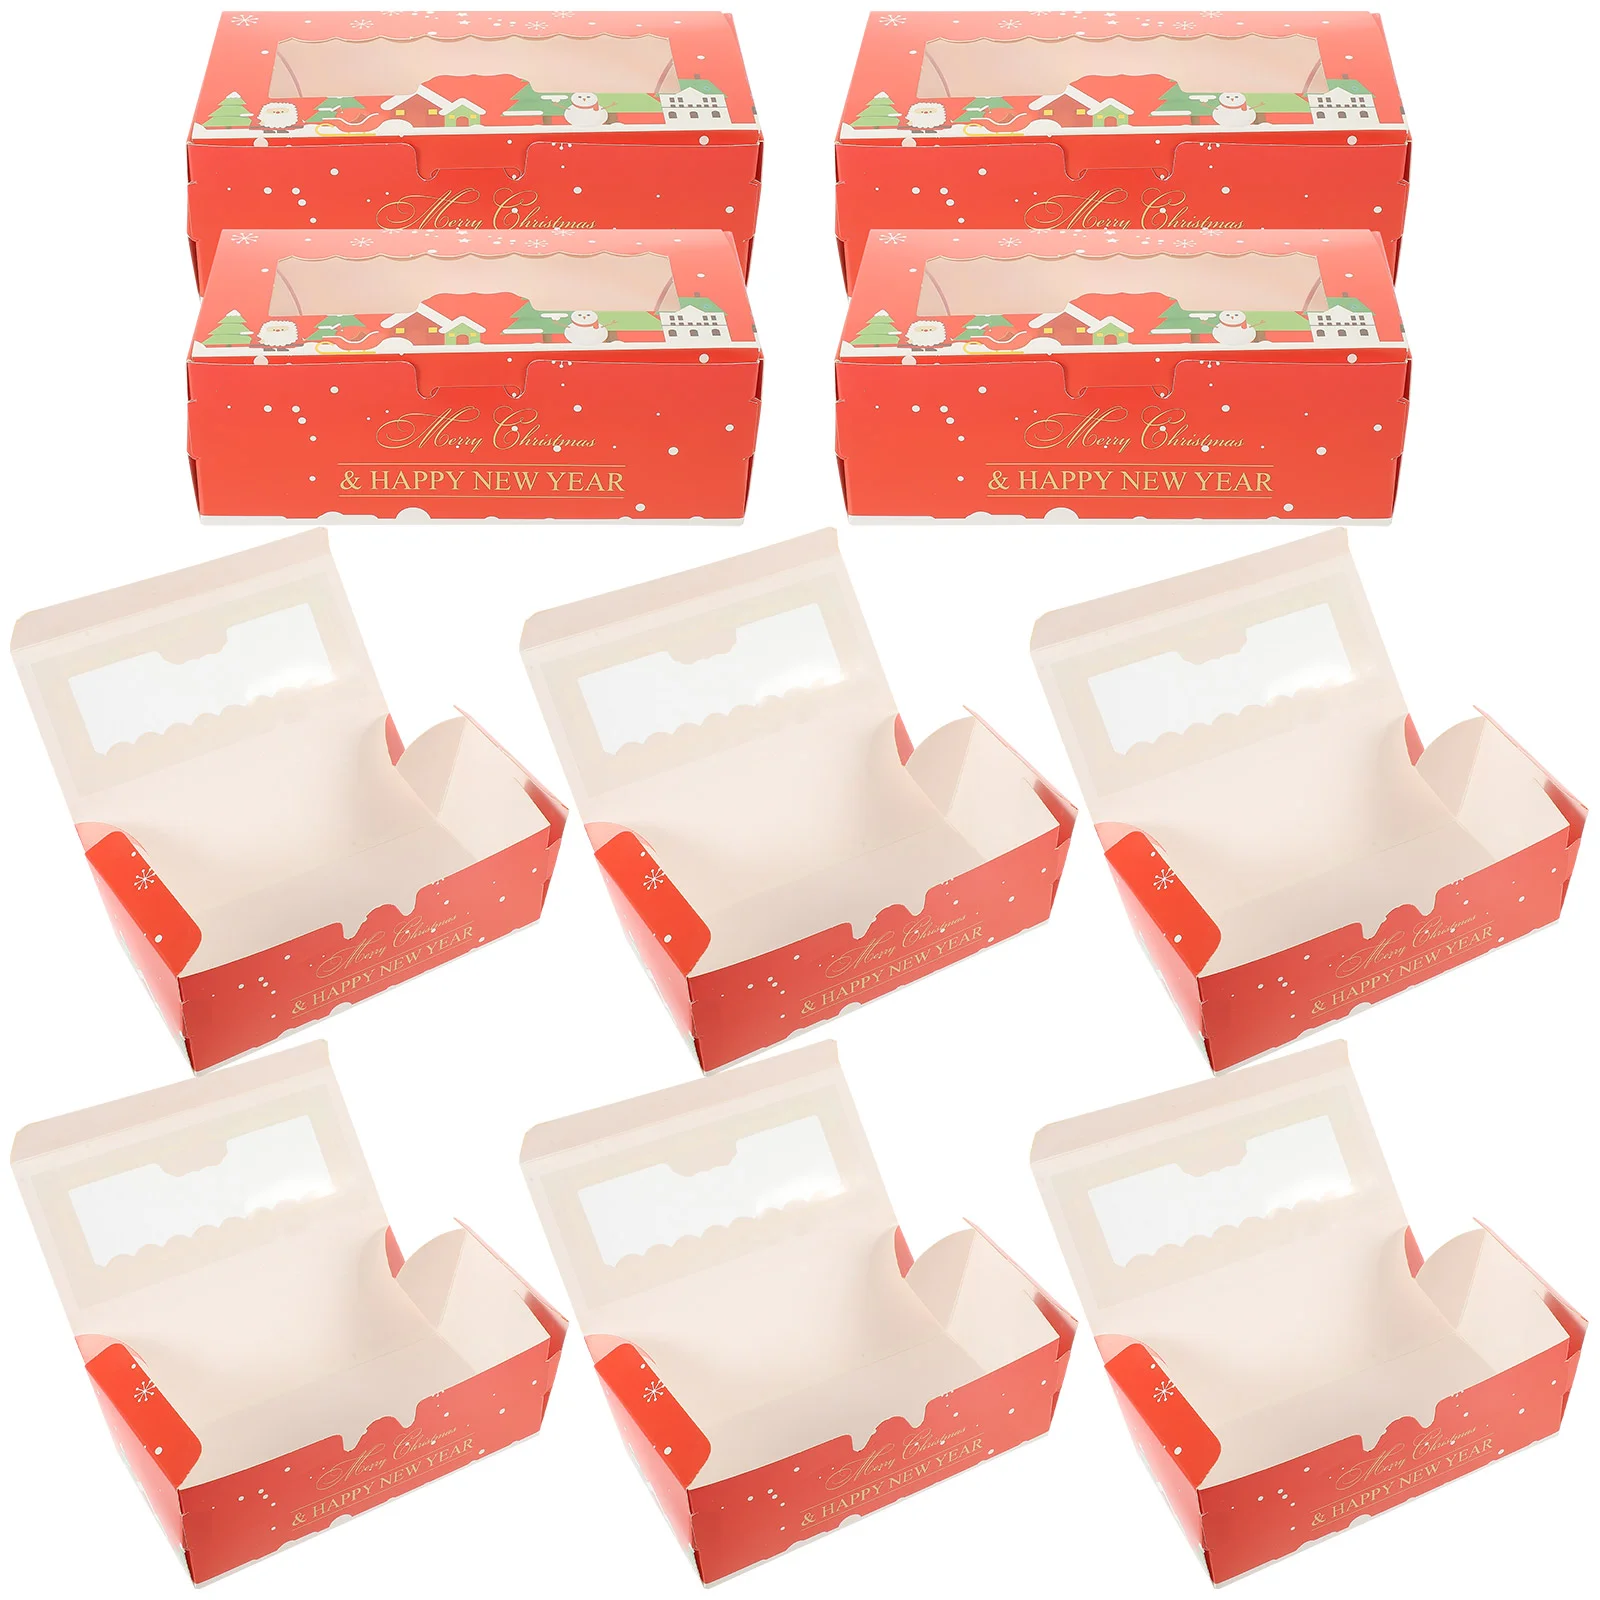 

10pcs Christmas Macaron Boxes Xmas Cookies Packaging Boxes Bakery Container Xmas Party Favor Boxes